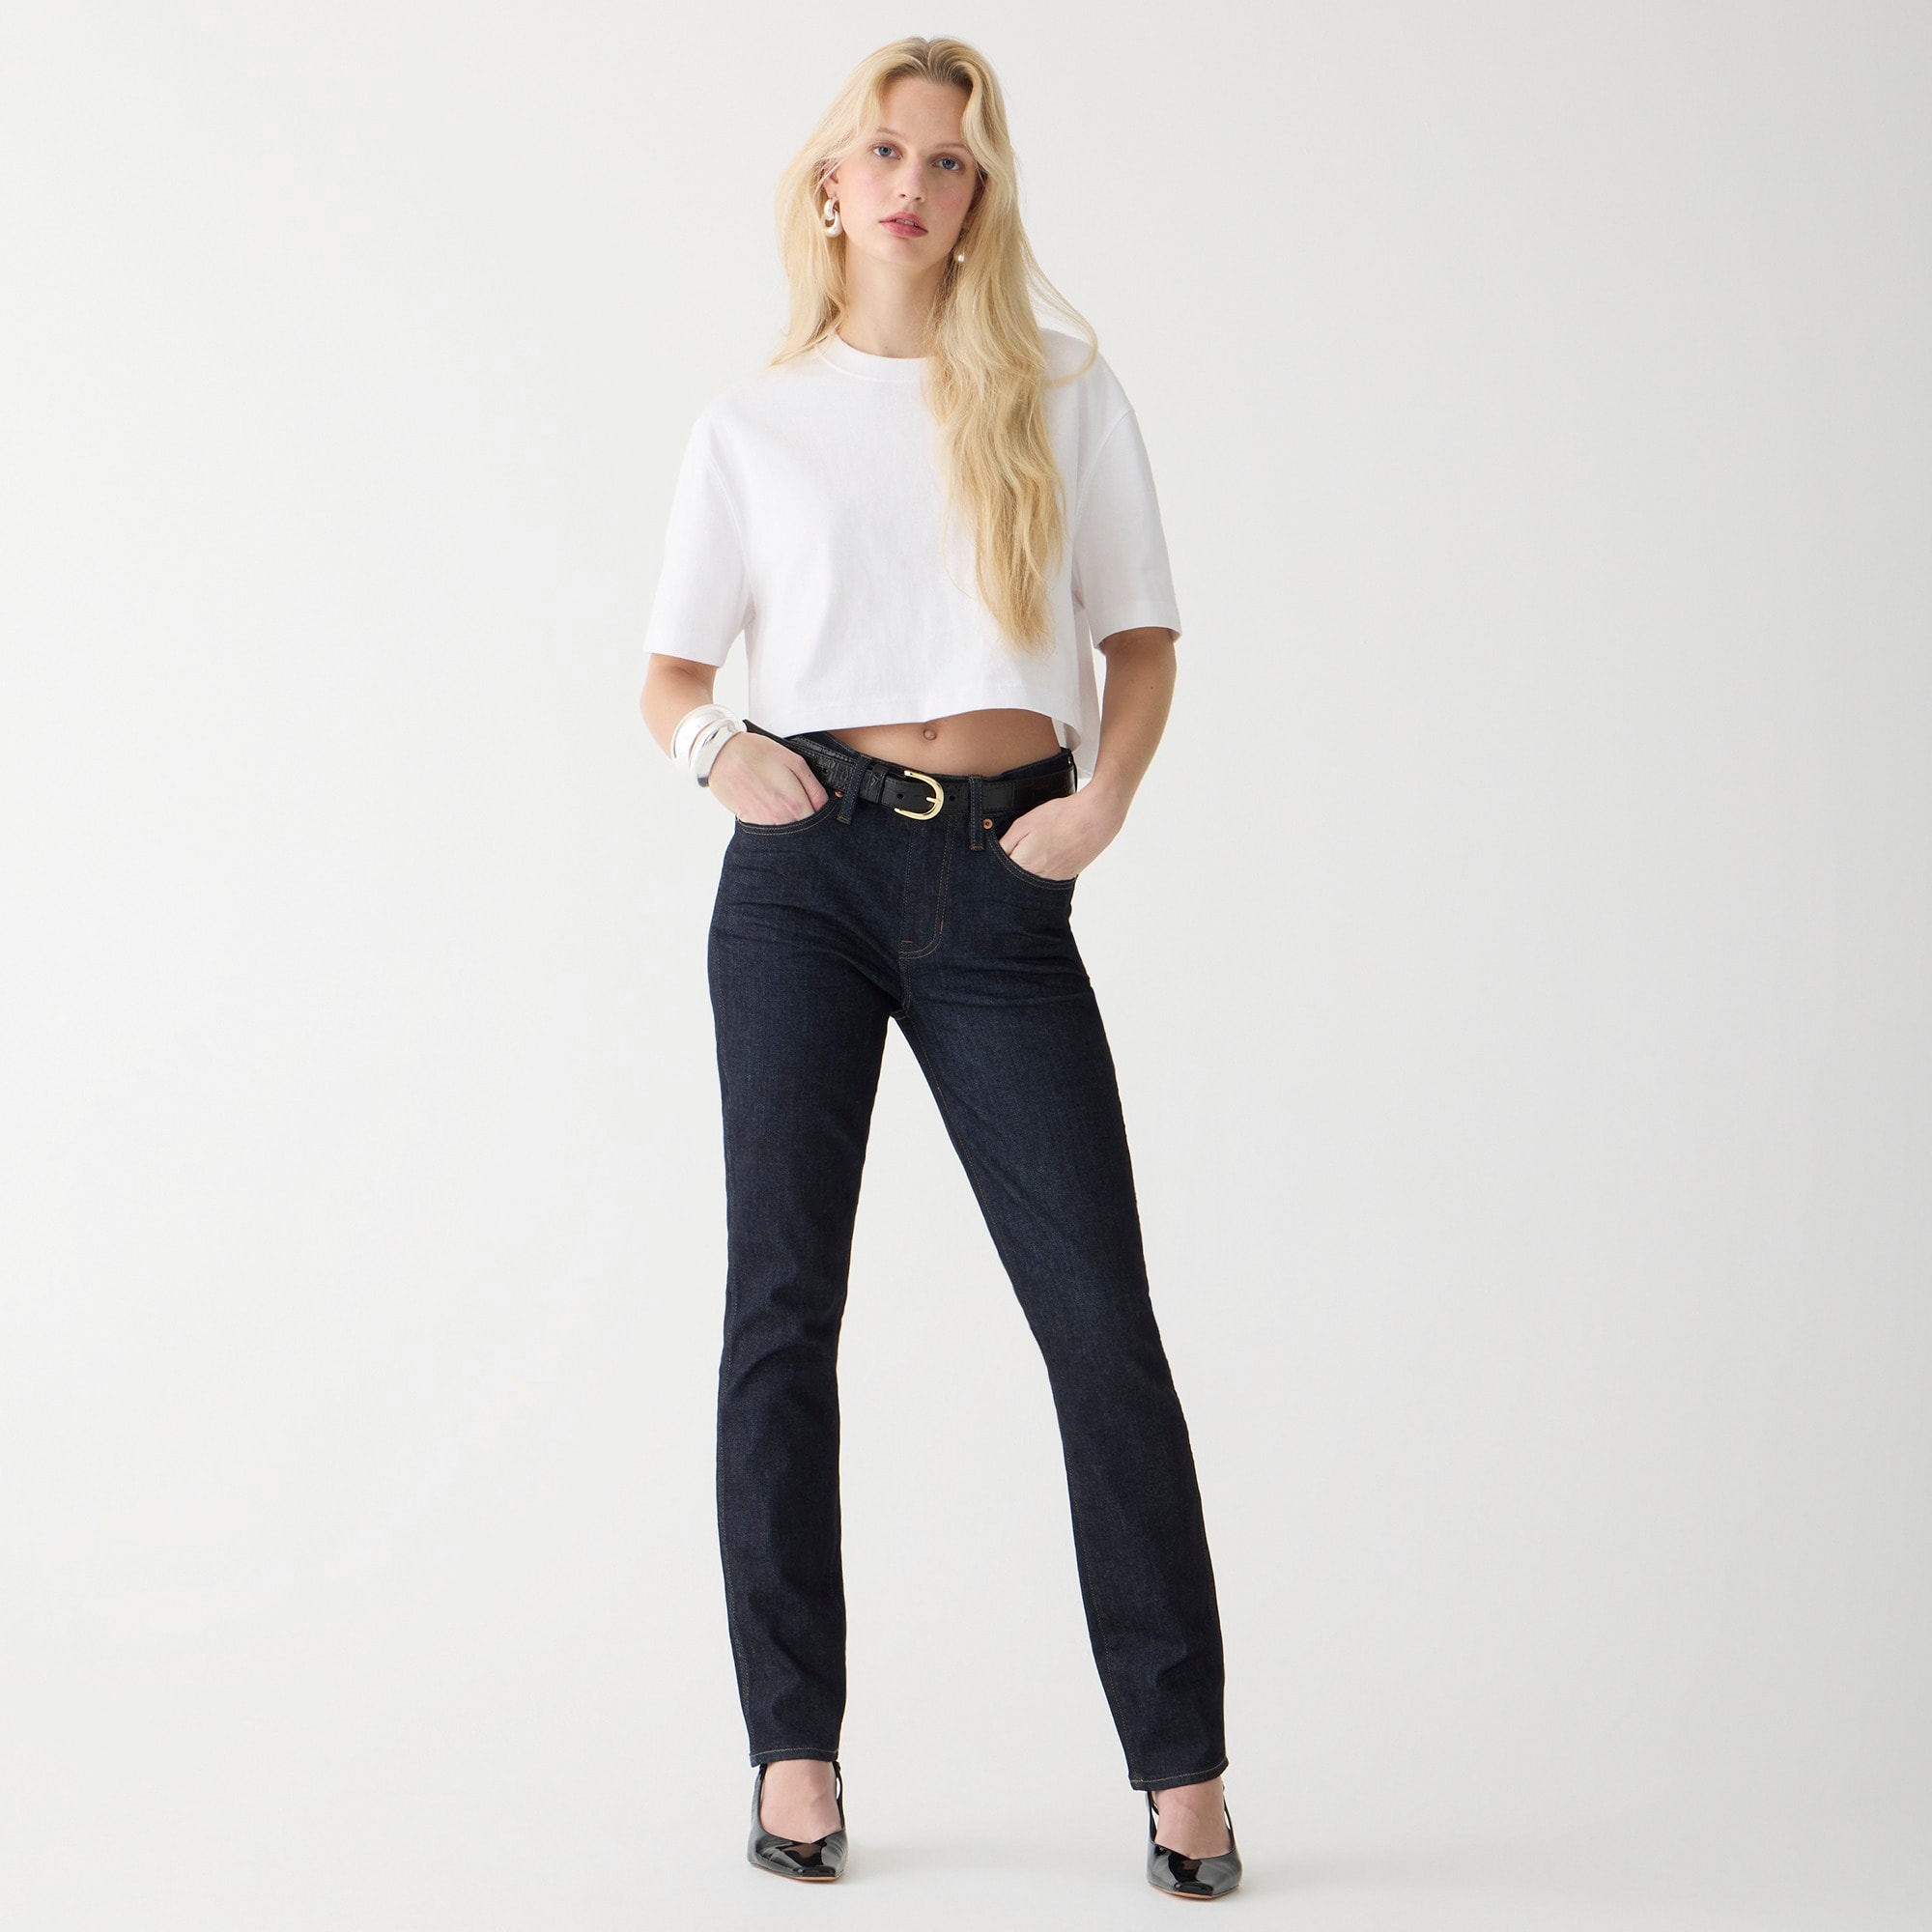 George Women's Classic Straight Fit Jeans 